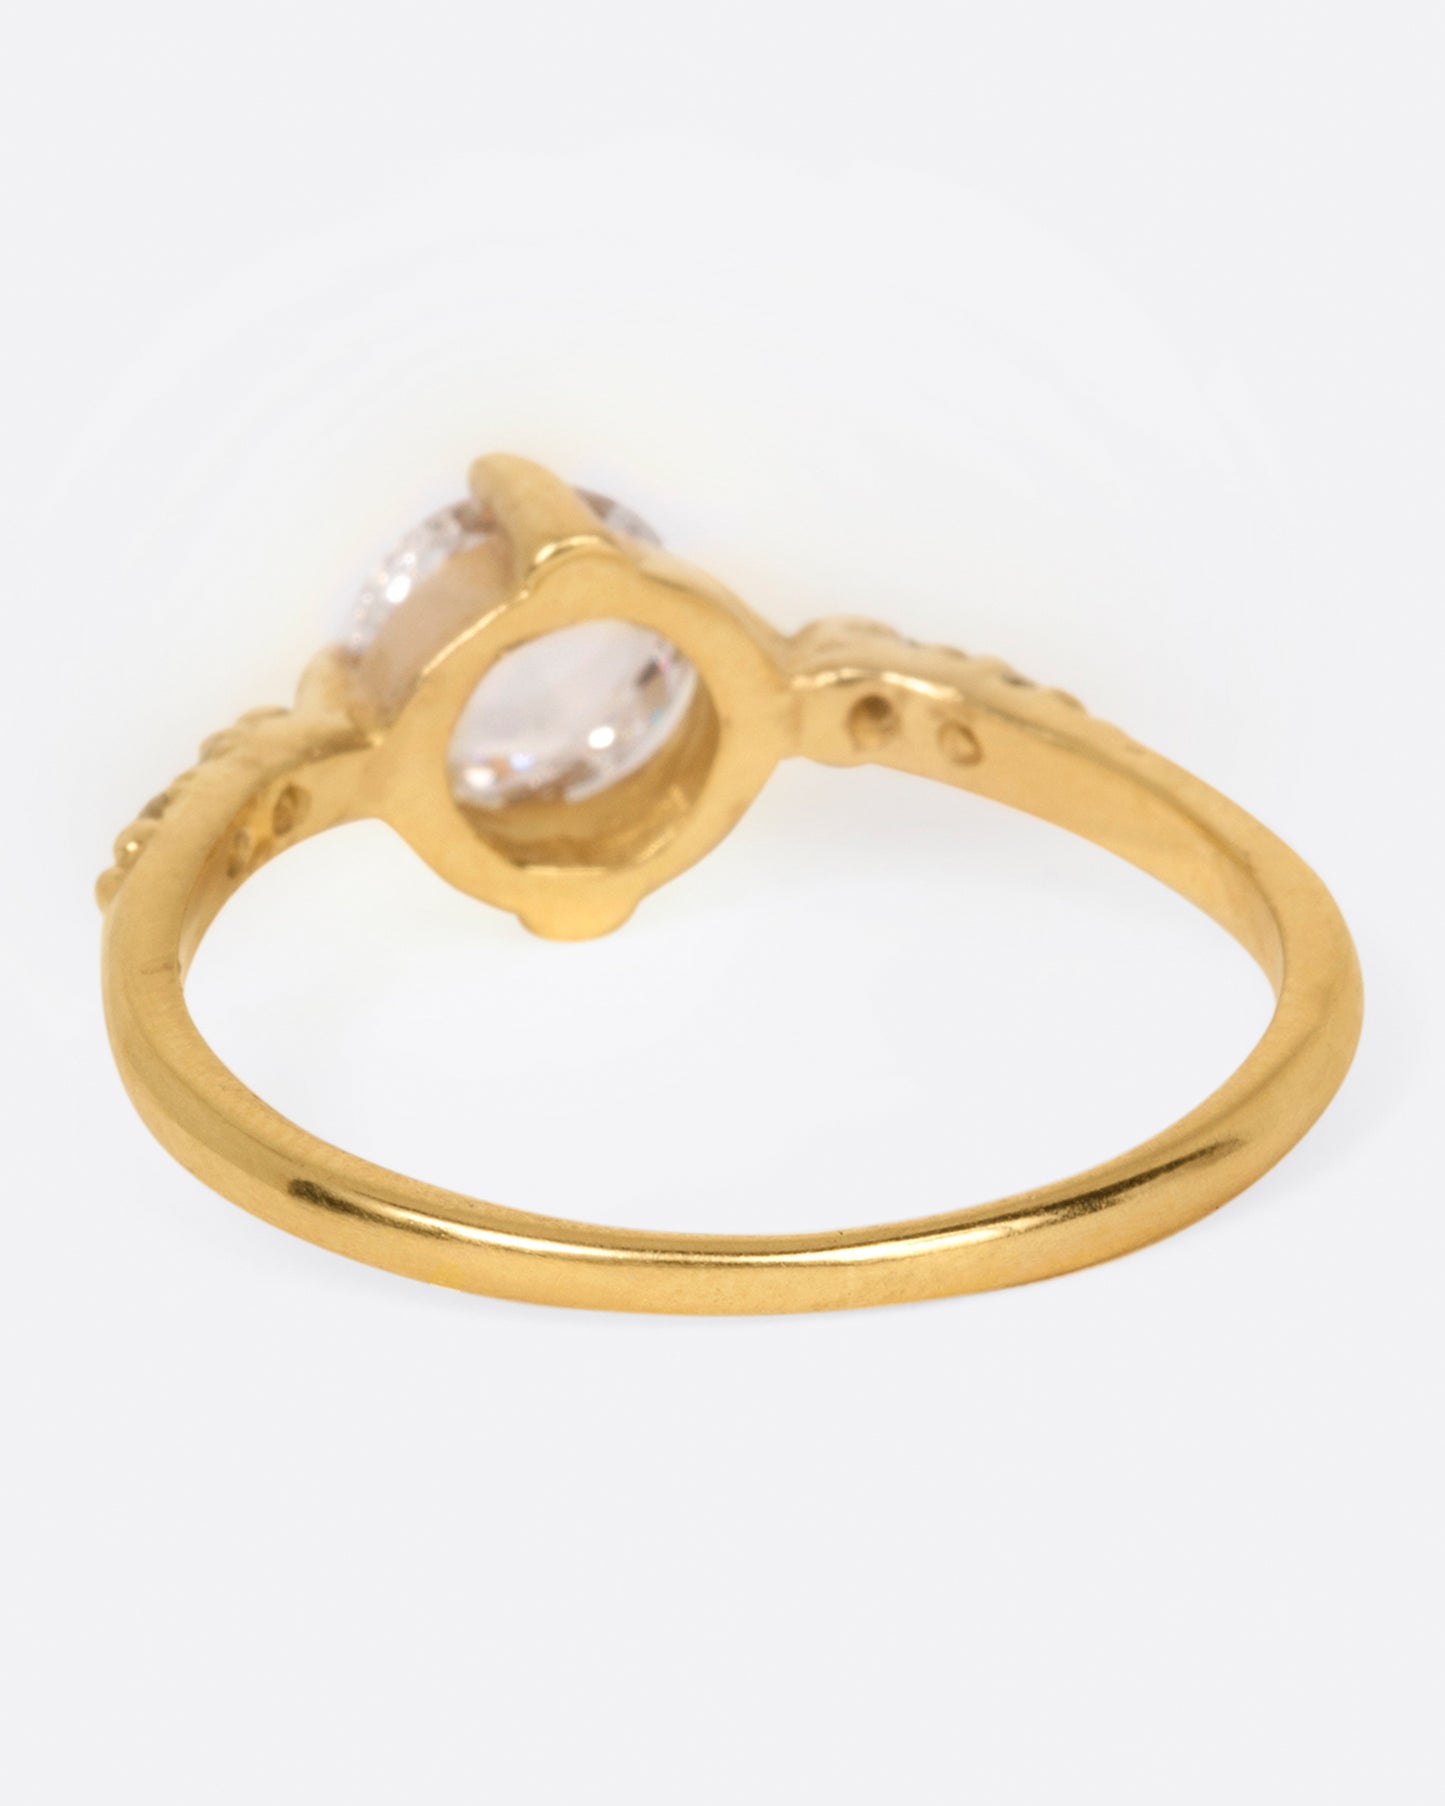 A yellow gold ring with a prong set rose cut diamond at the center and two diamonds on either side, shown from the back.